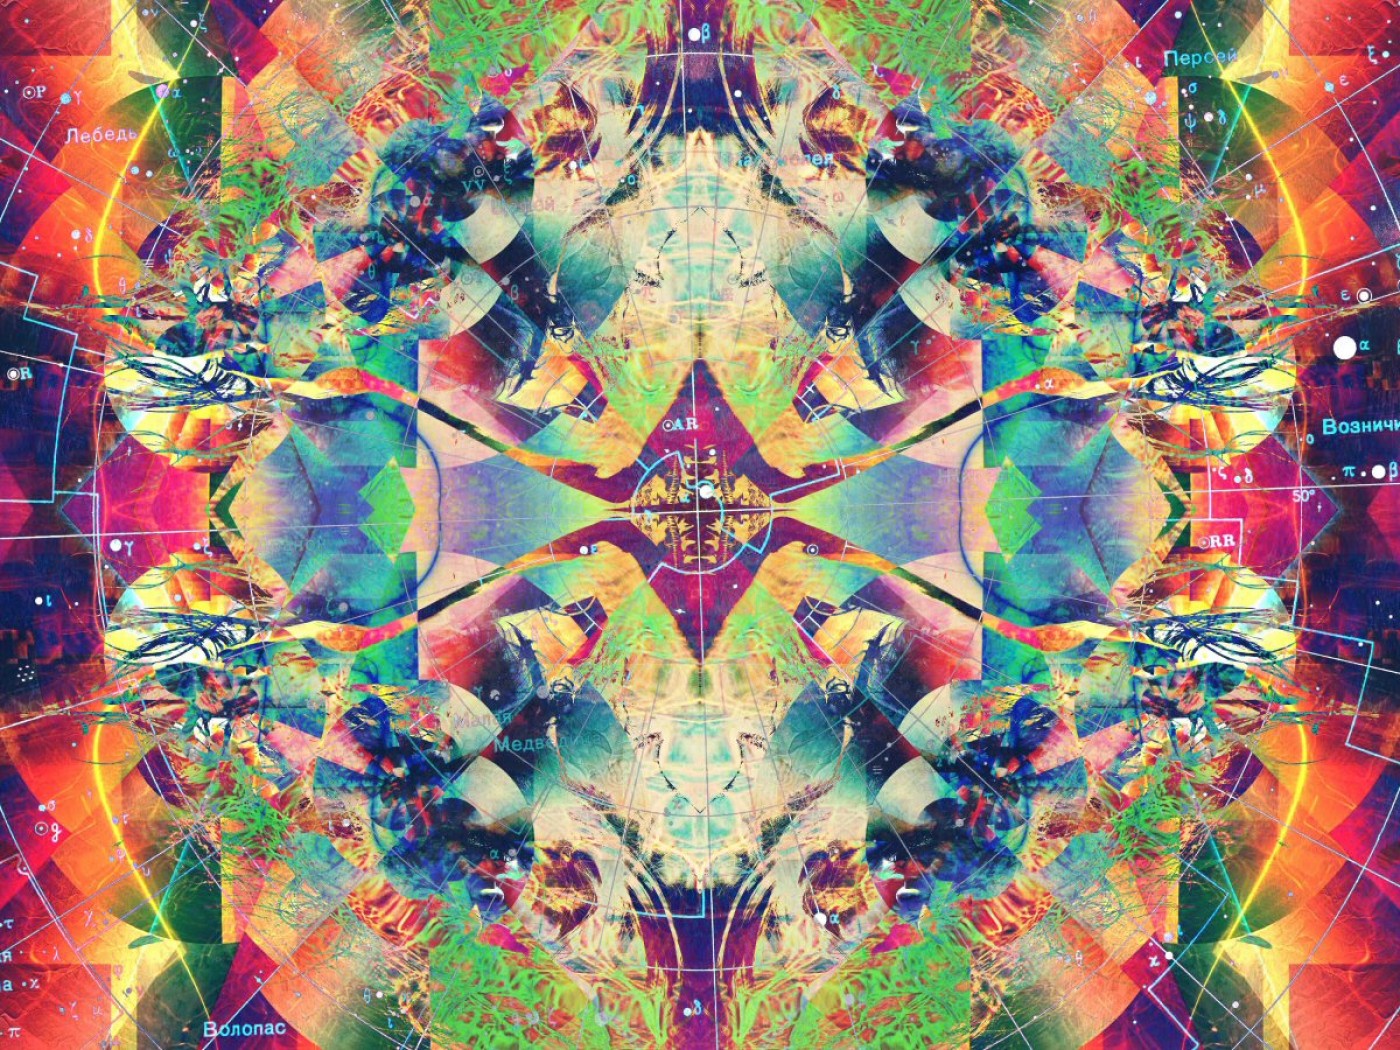 Trippy Abstract Cool Colorful Hd Wallpaper for Desktop and Mobiles